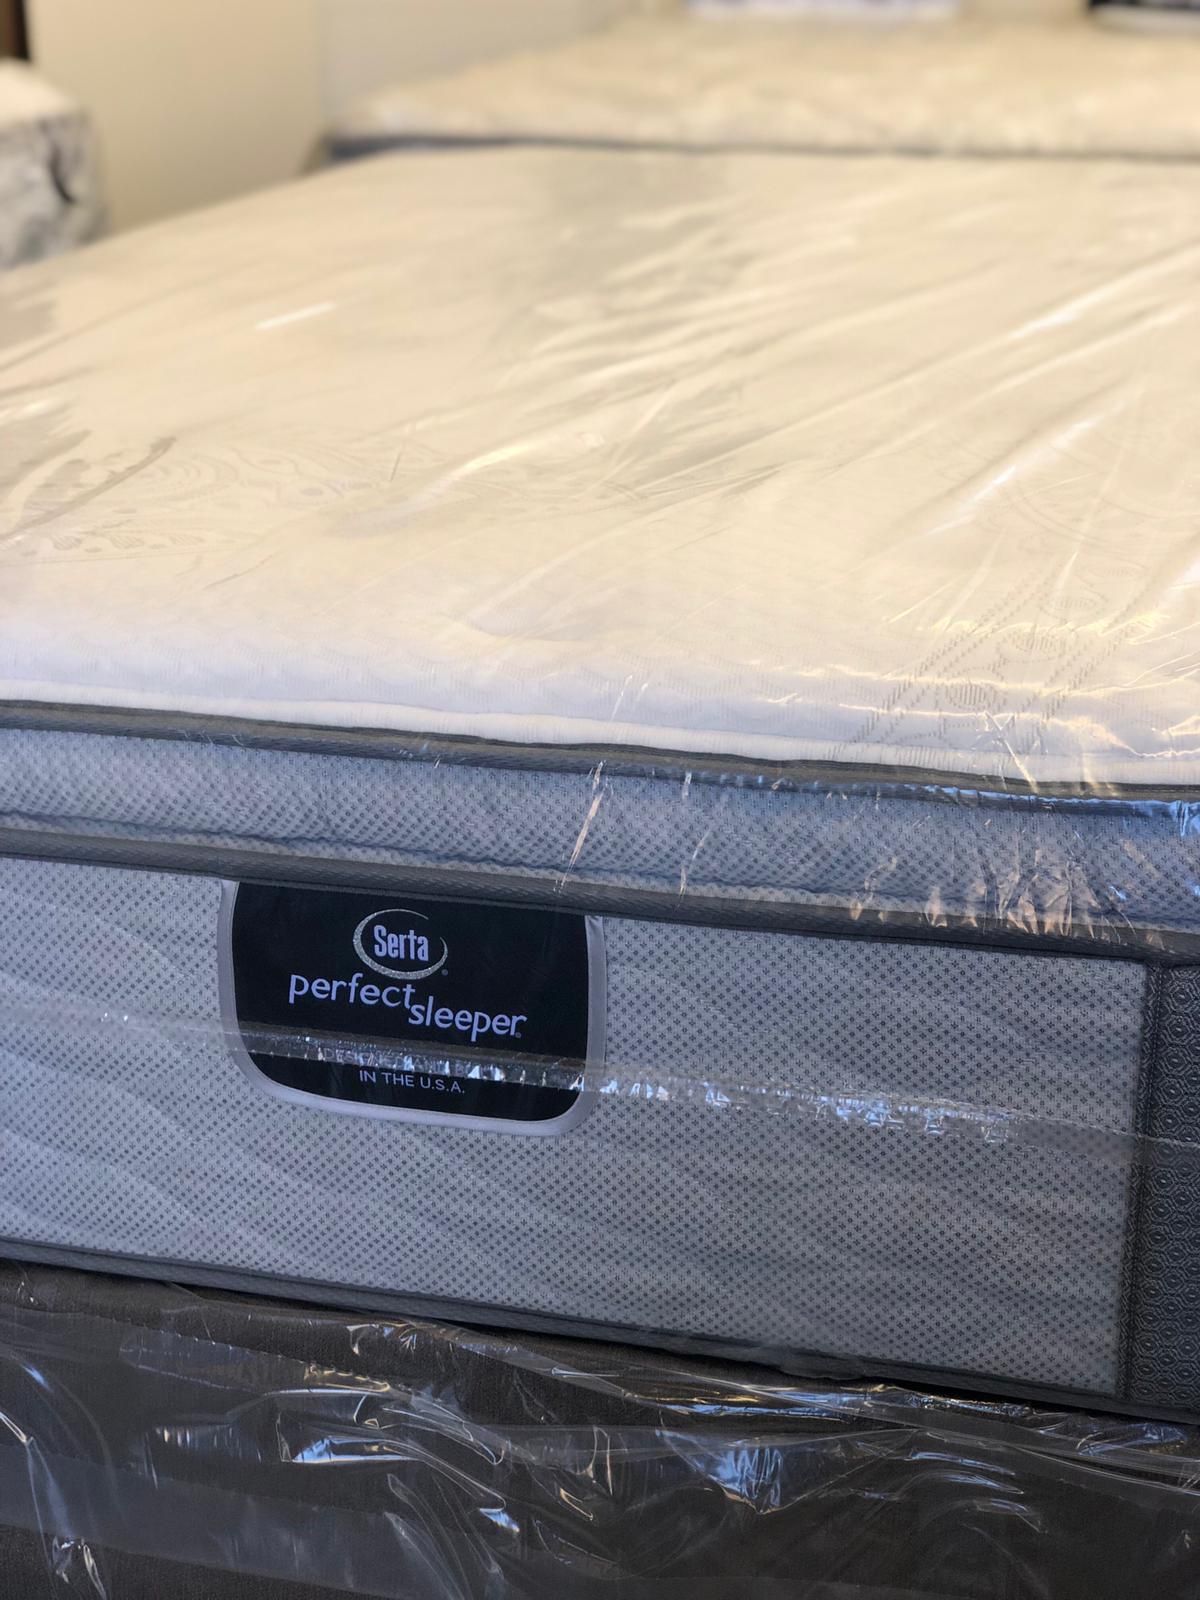 Brand-New 🔝Quality Queen Size Bed 💯Original Name Brand Queen Mattress. Easy NO CREDIT Financing Take it Home with ONLY $40 DOWN!!